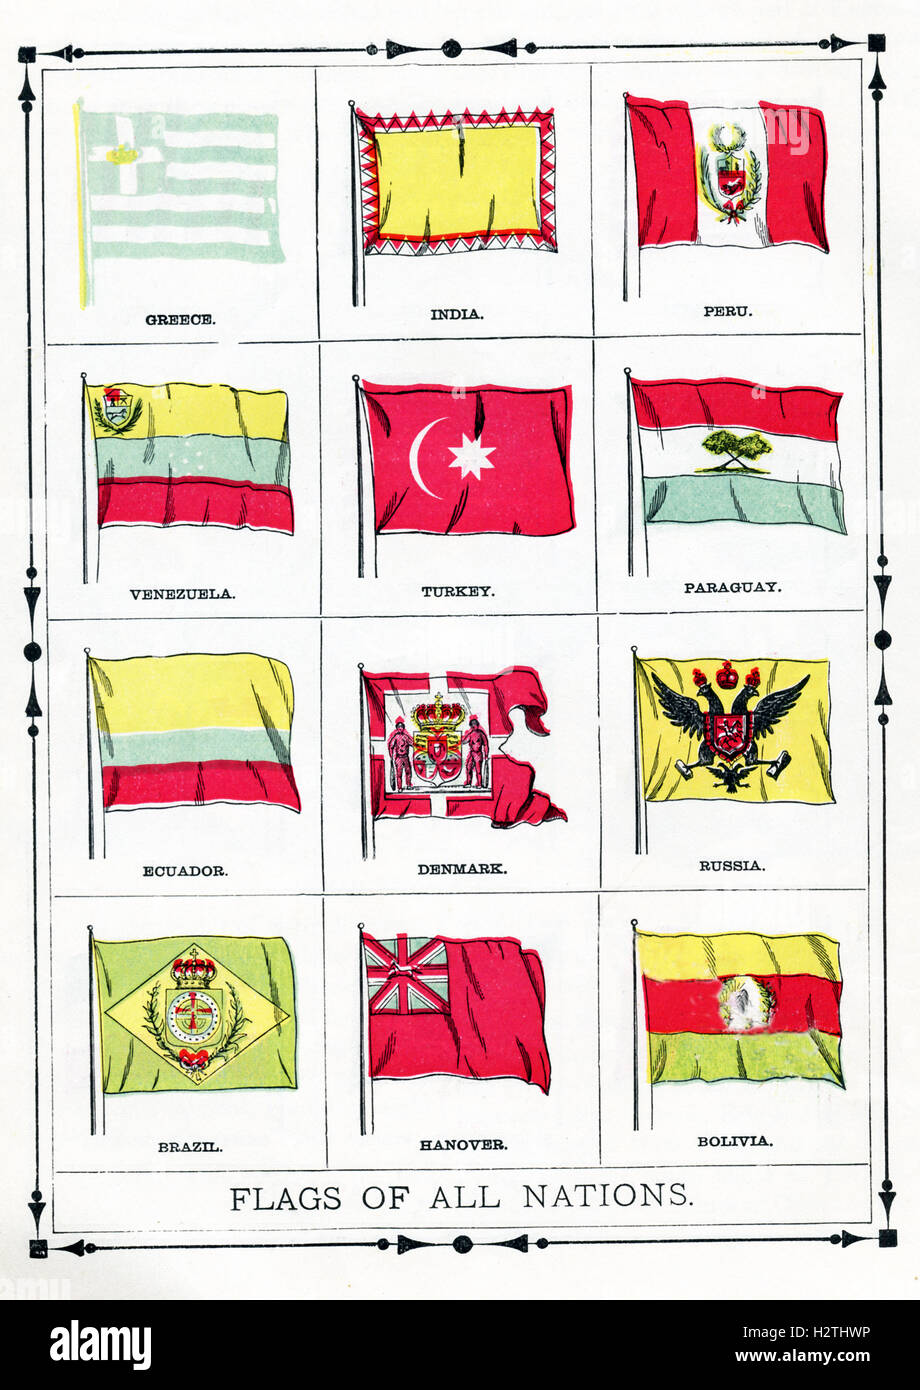 This illustration of national flags dates to 1896. They are, from left to right, top to bottom: Greece, India, Peru, Venezuela, Turkey, Paraguay, Ecuador, Denmark, Russia, Brazil, Hanover, Bolivia. Stock Photo